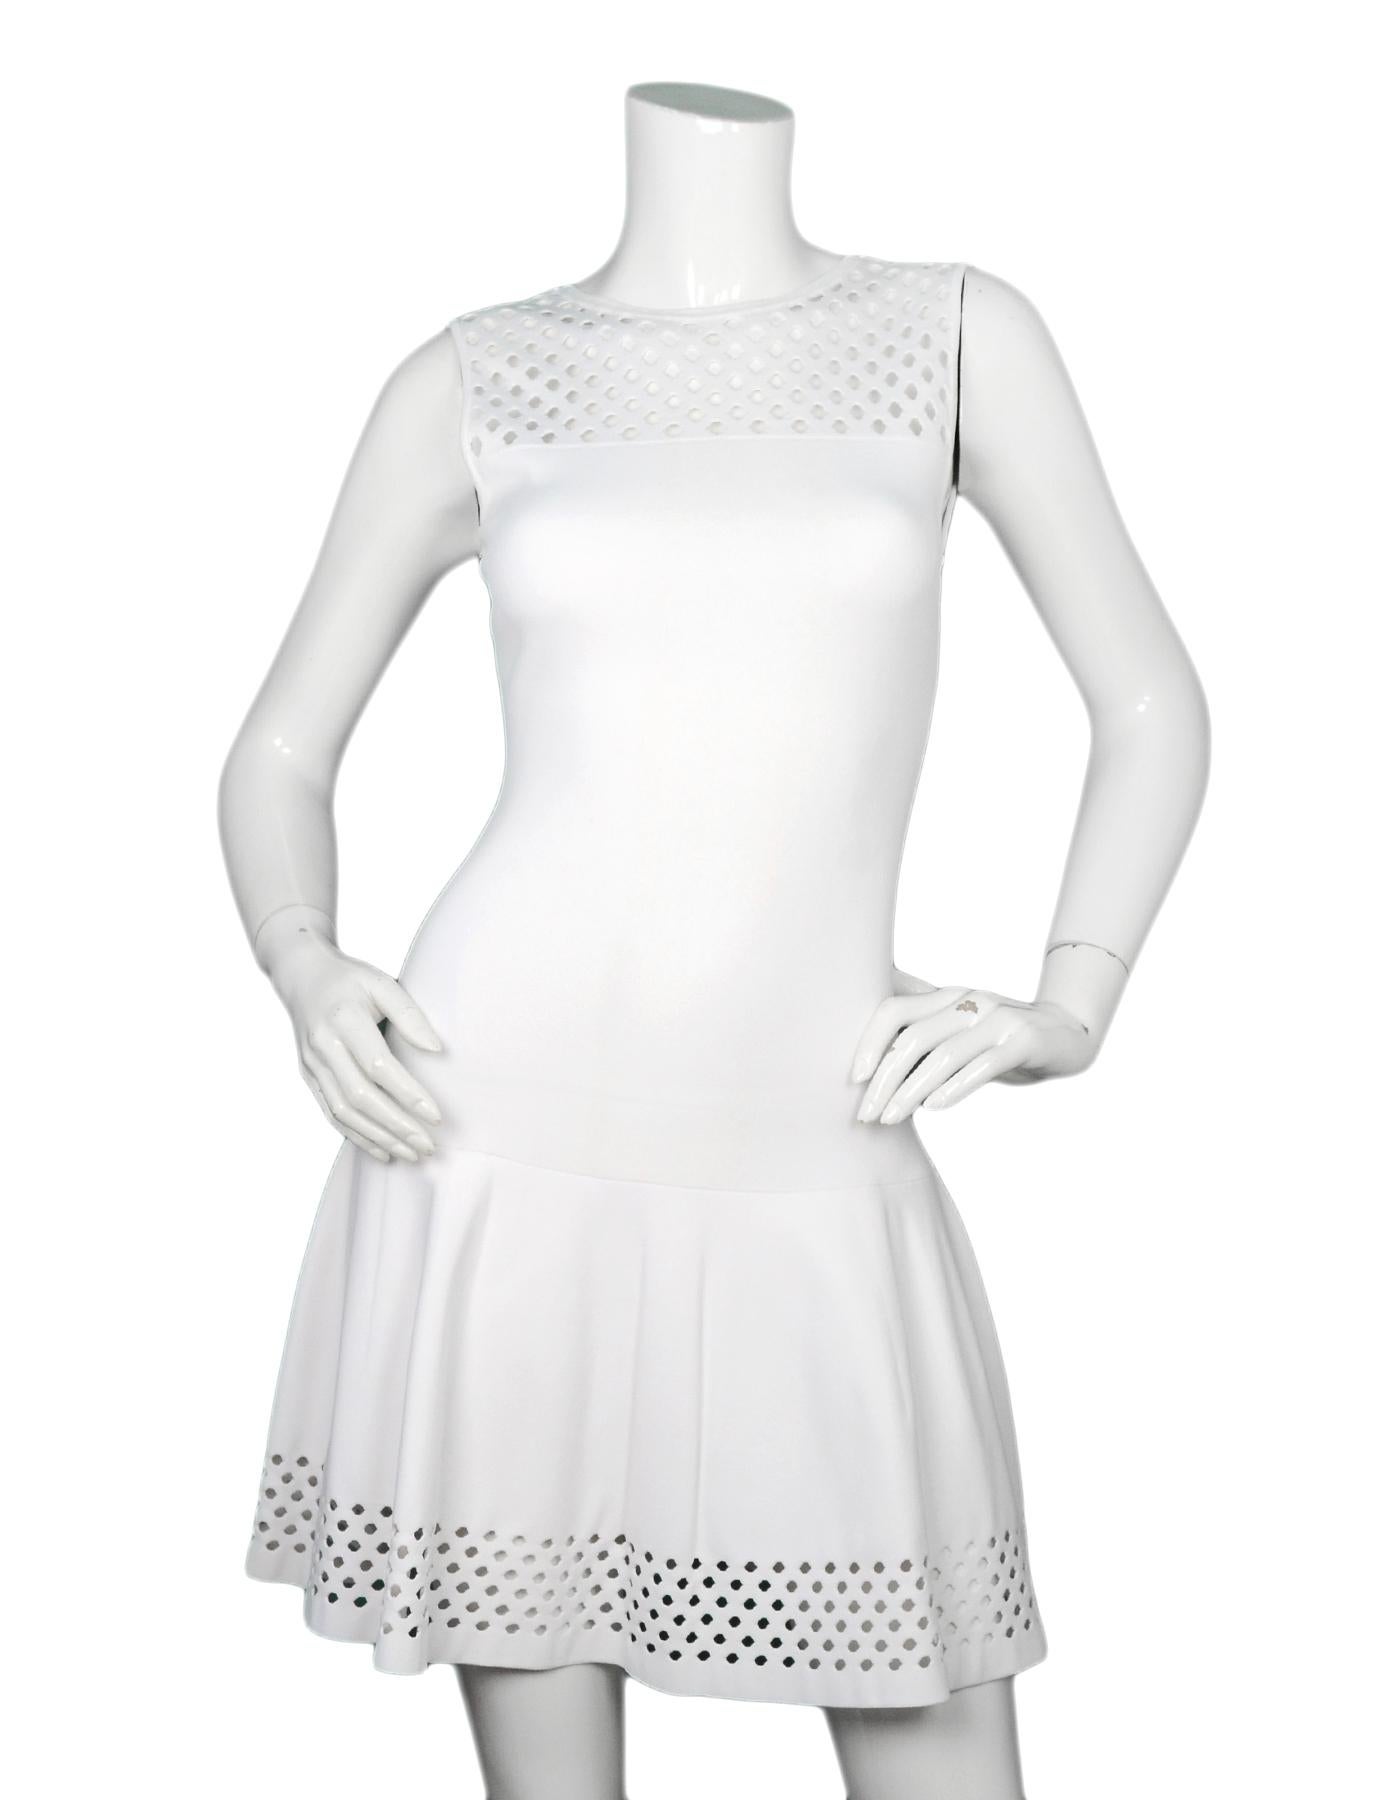 Fendi White Knit Cutout Mini Dress Sz IT36/US0

Made In: Italy
Color: White
Materials: 84% rayon 17% polyester 
Opening/Closure: Hidden back zipper with hook eye at top
Overall Condition: Excellent pre-owned condition 
Estimated Retail: $1,200 +